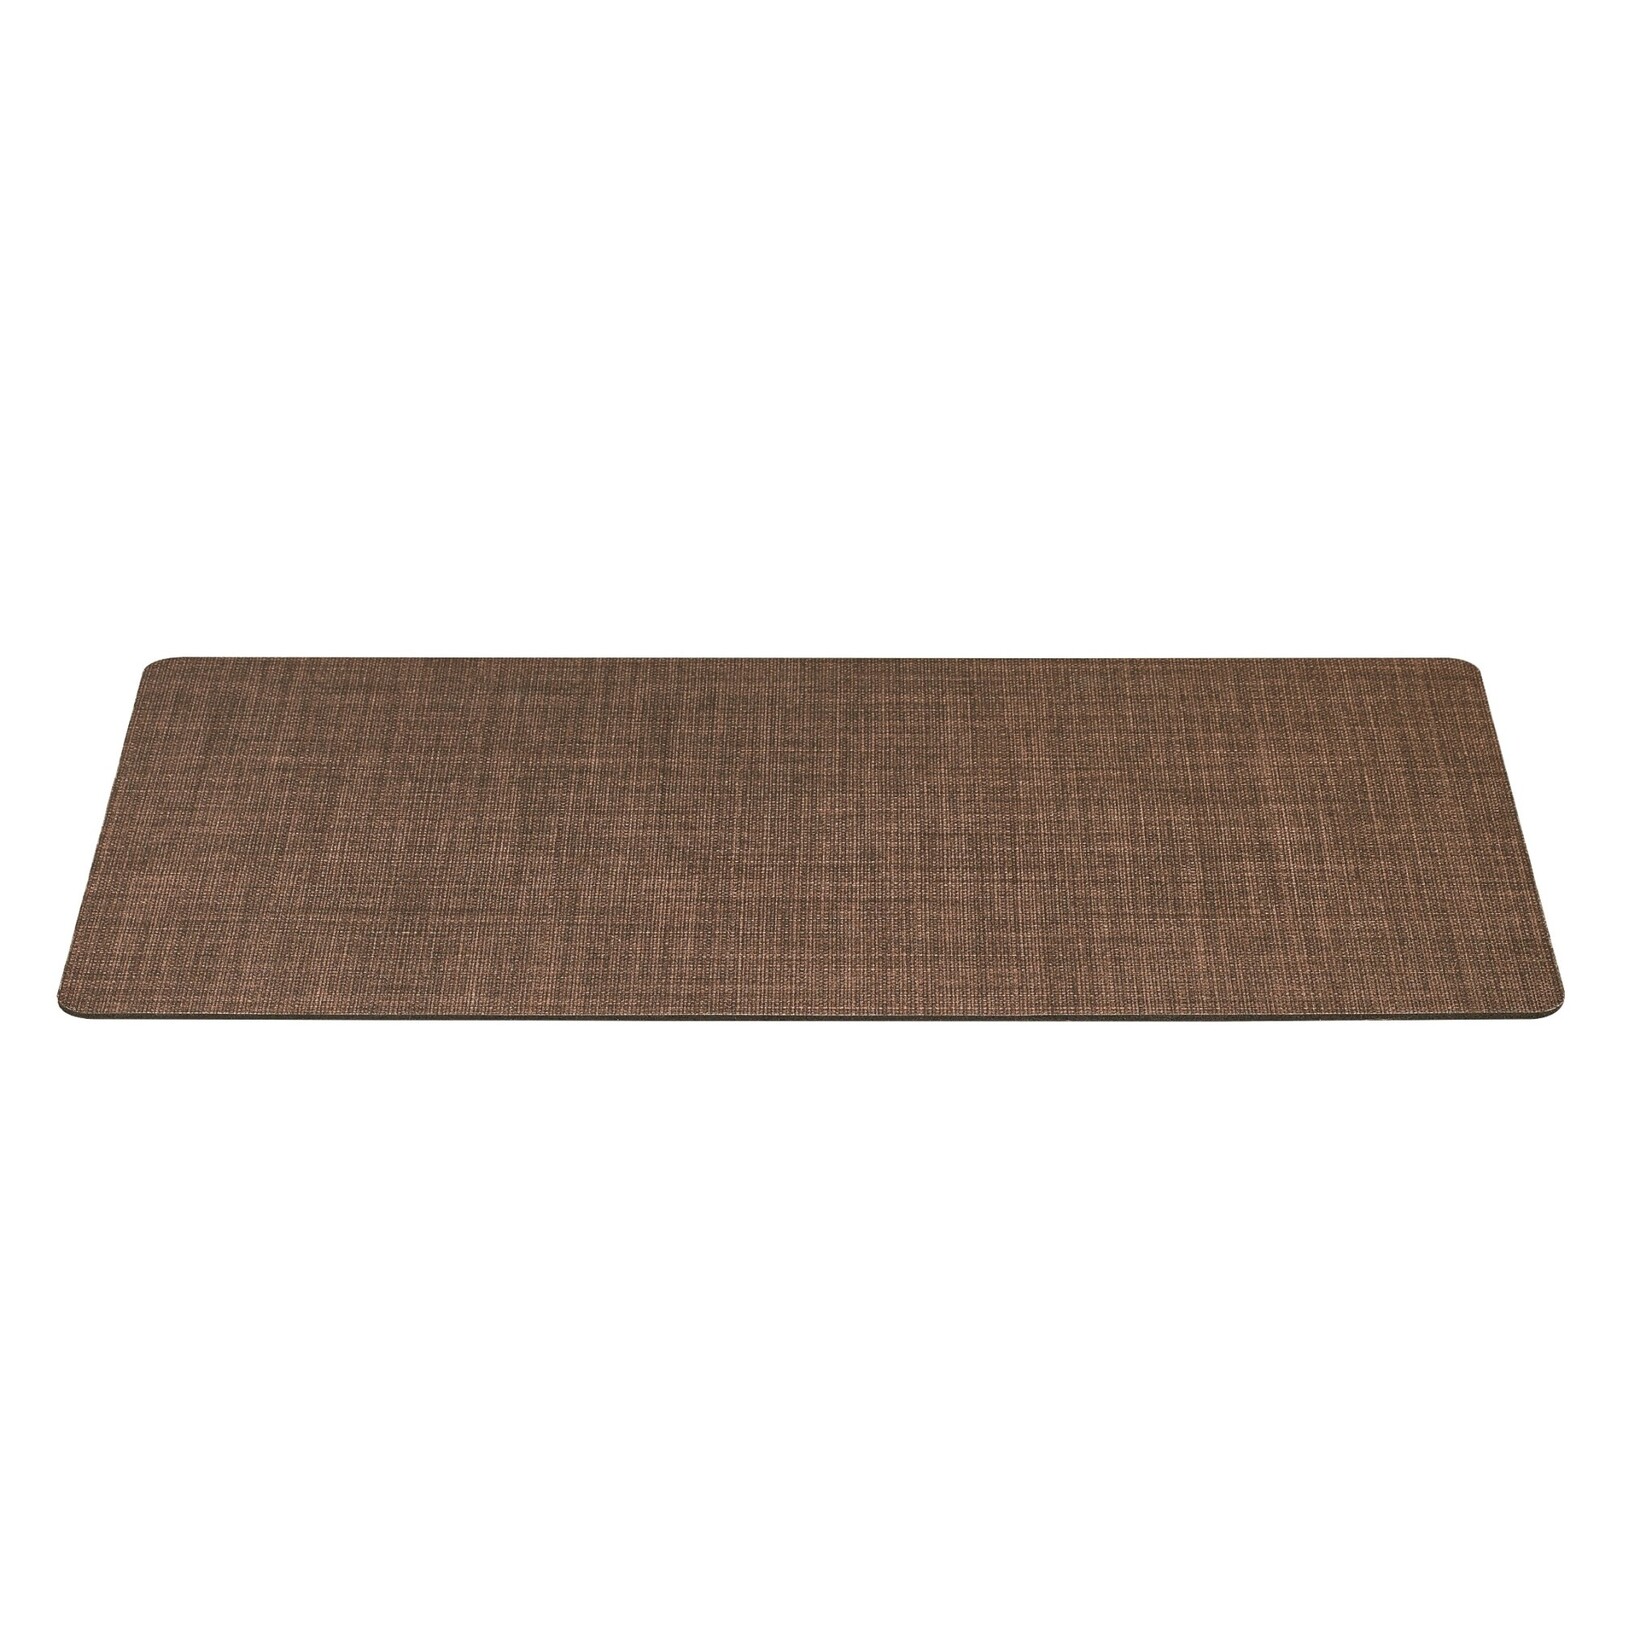 Bowsers Gourmet Placemat Driftwood